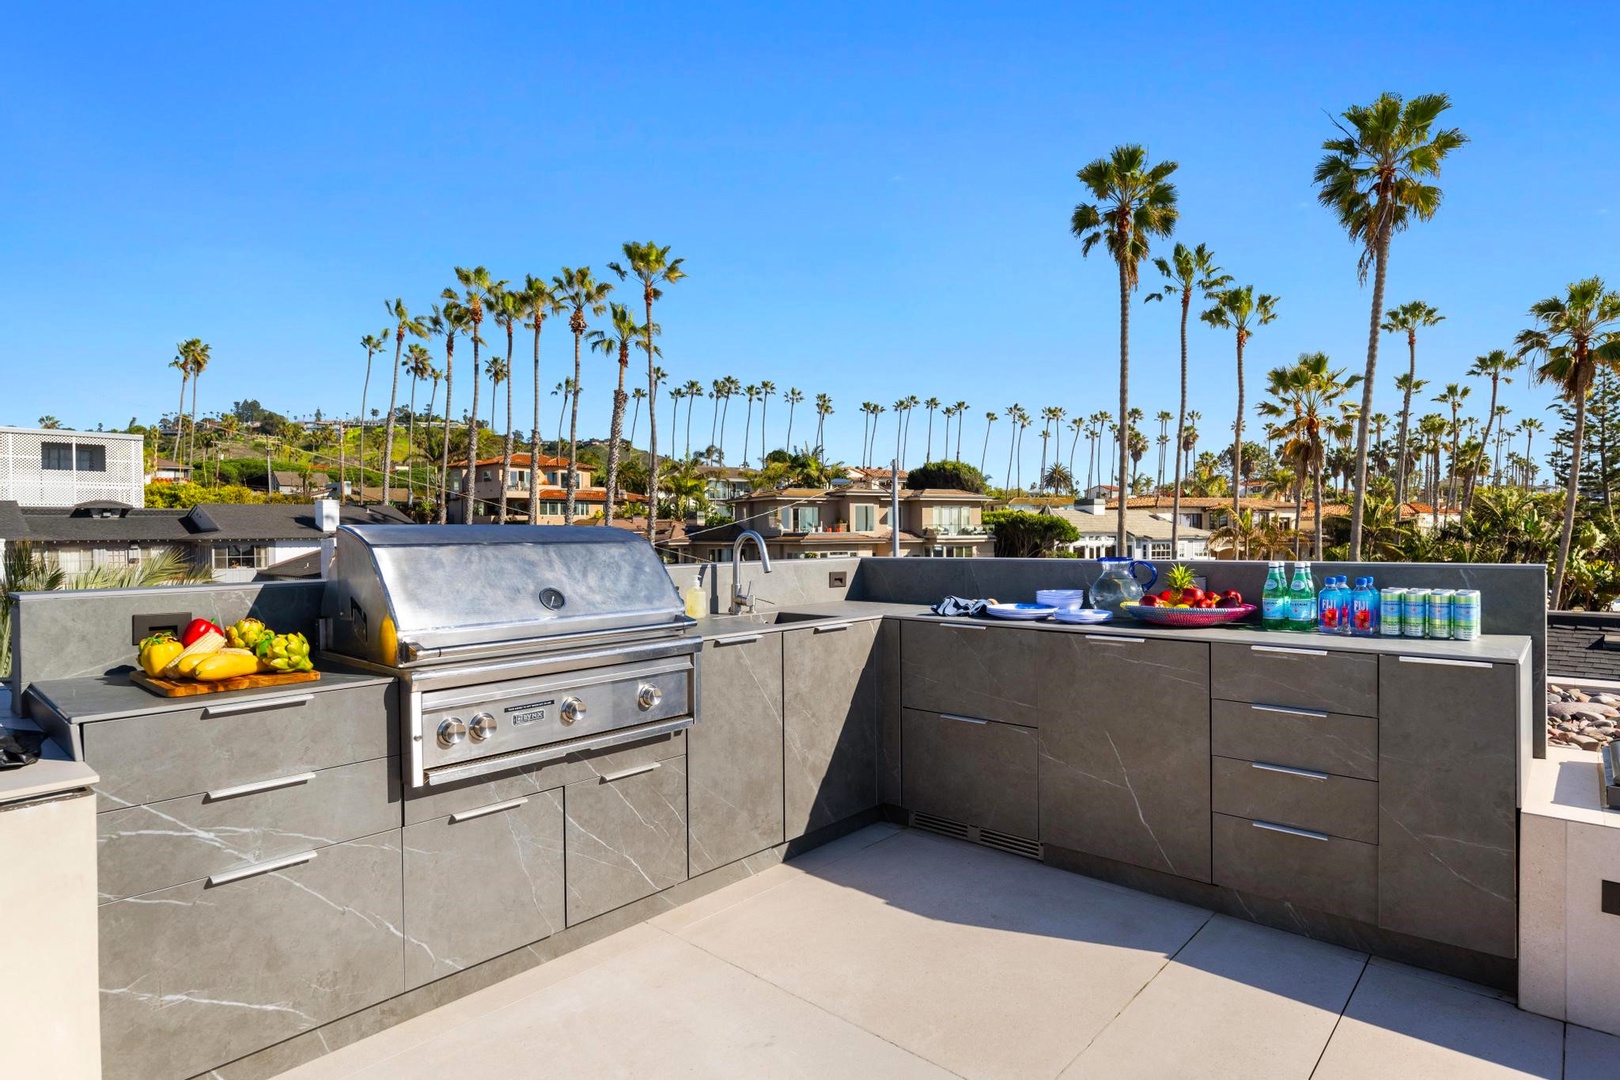 Built-in BBQ and outdoor kitchen